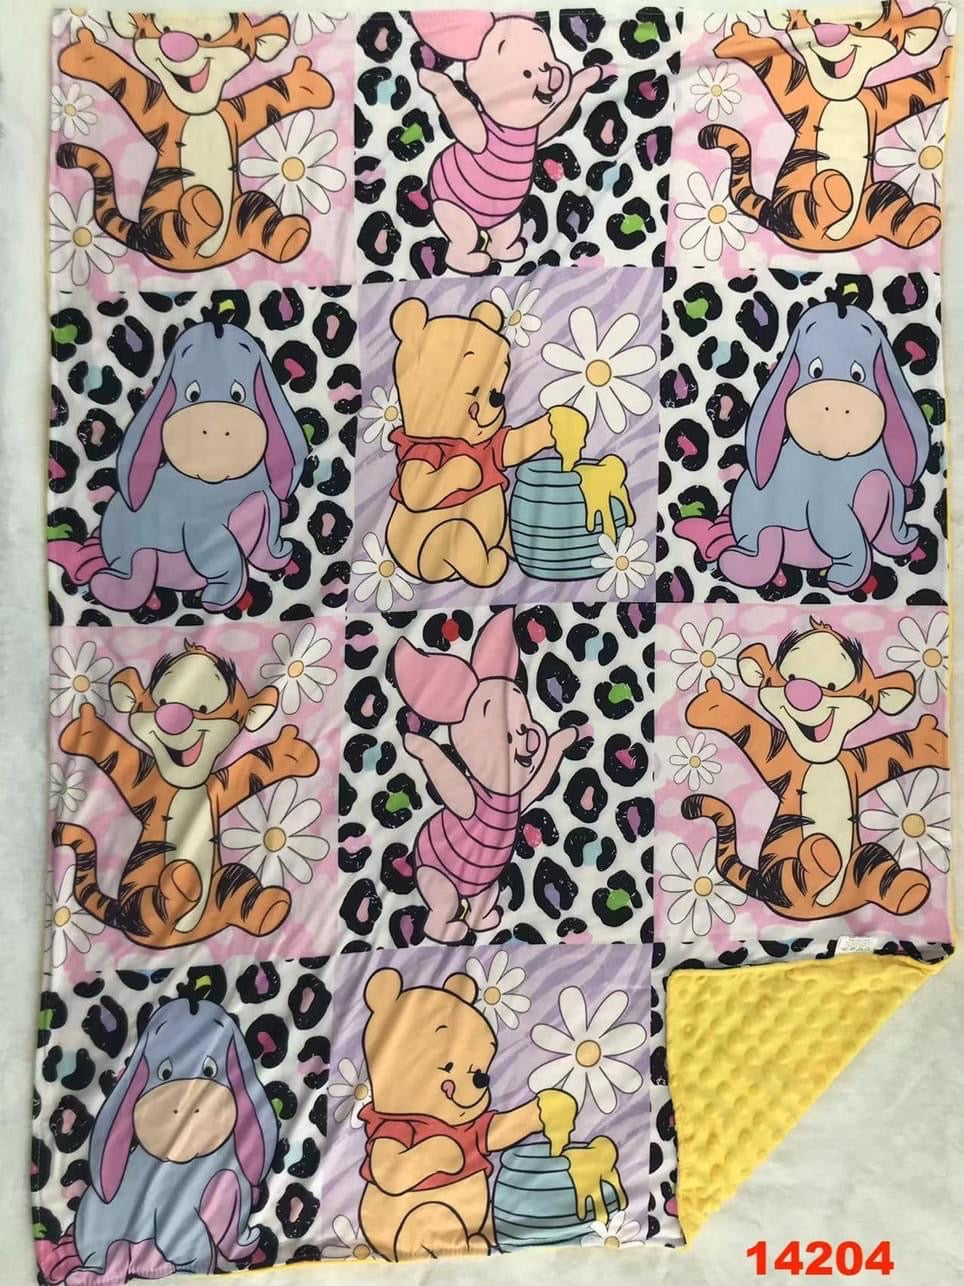 Preorder pooh bear and friends Minky blanket 30x40”